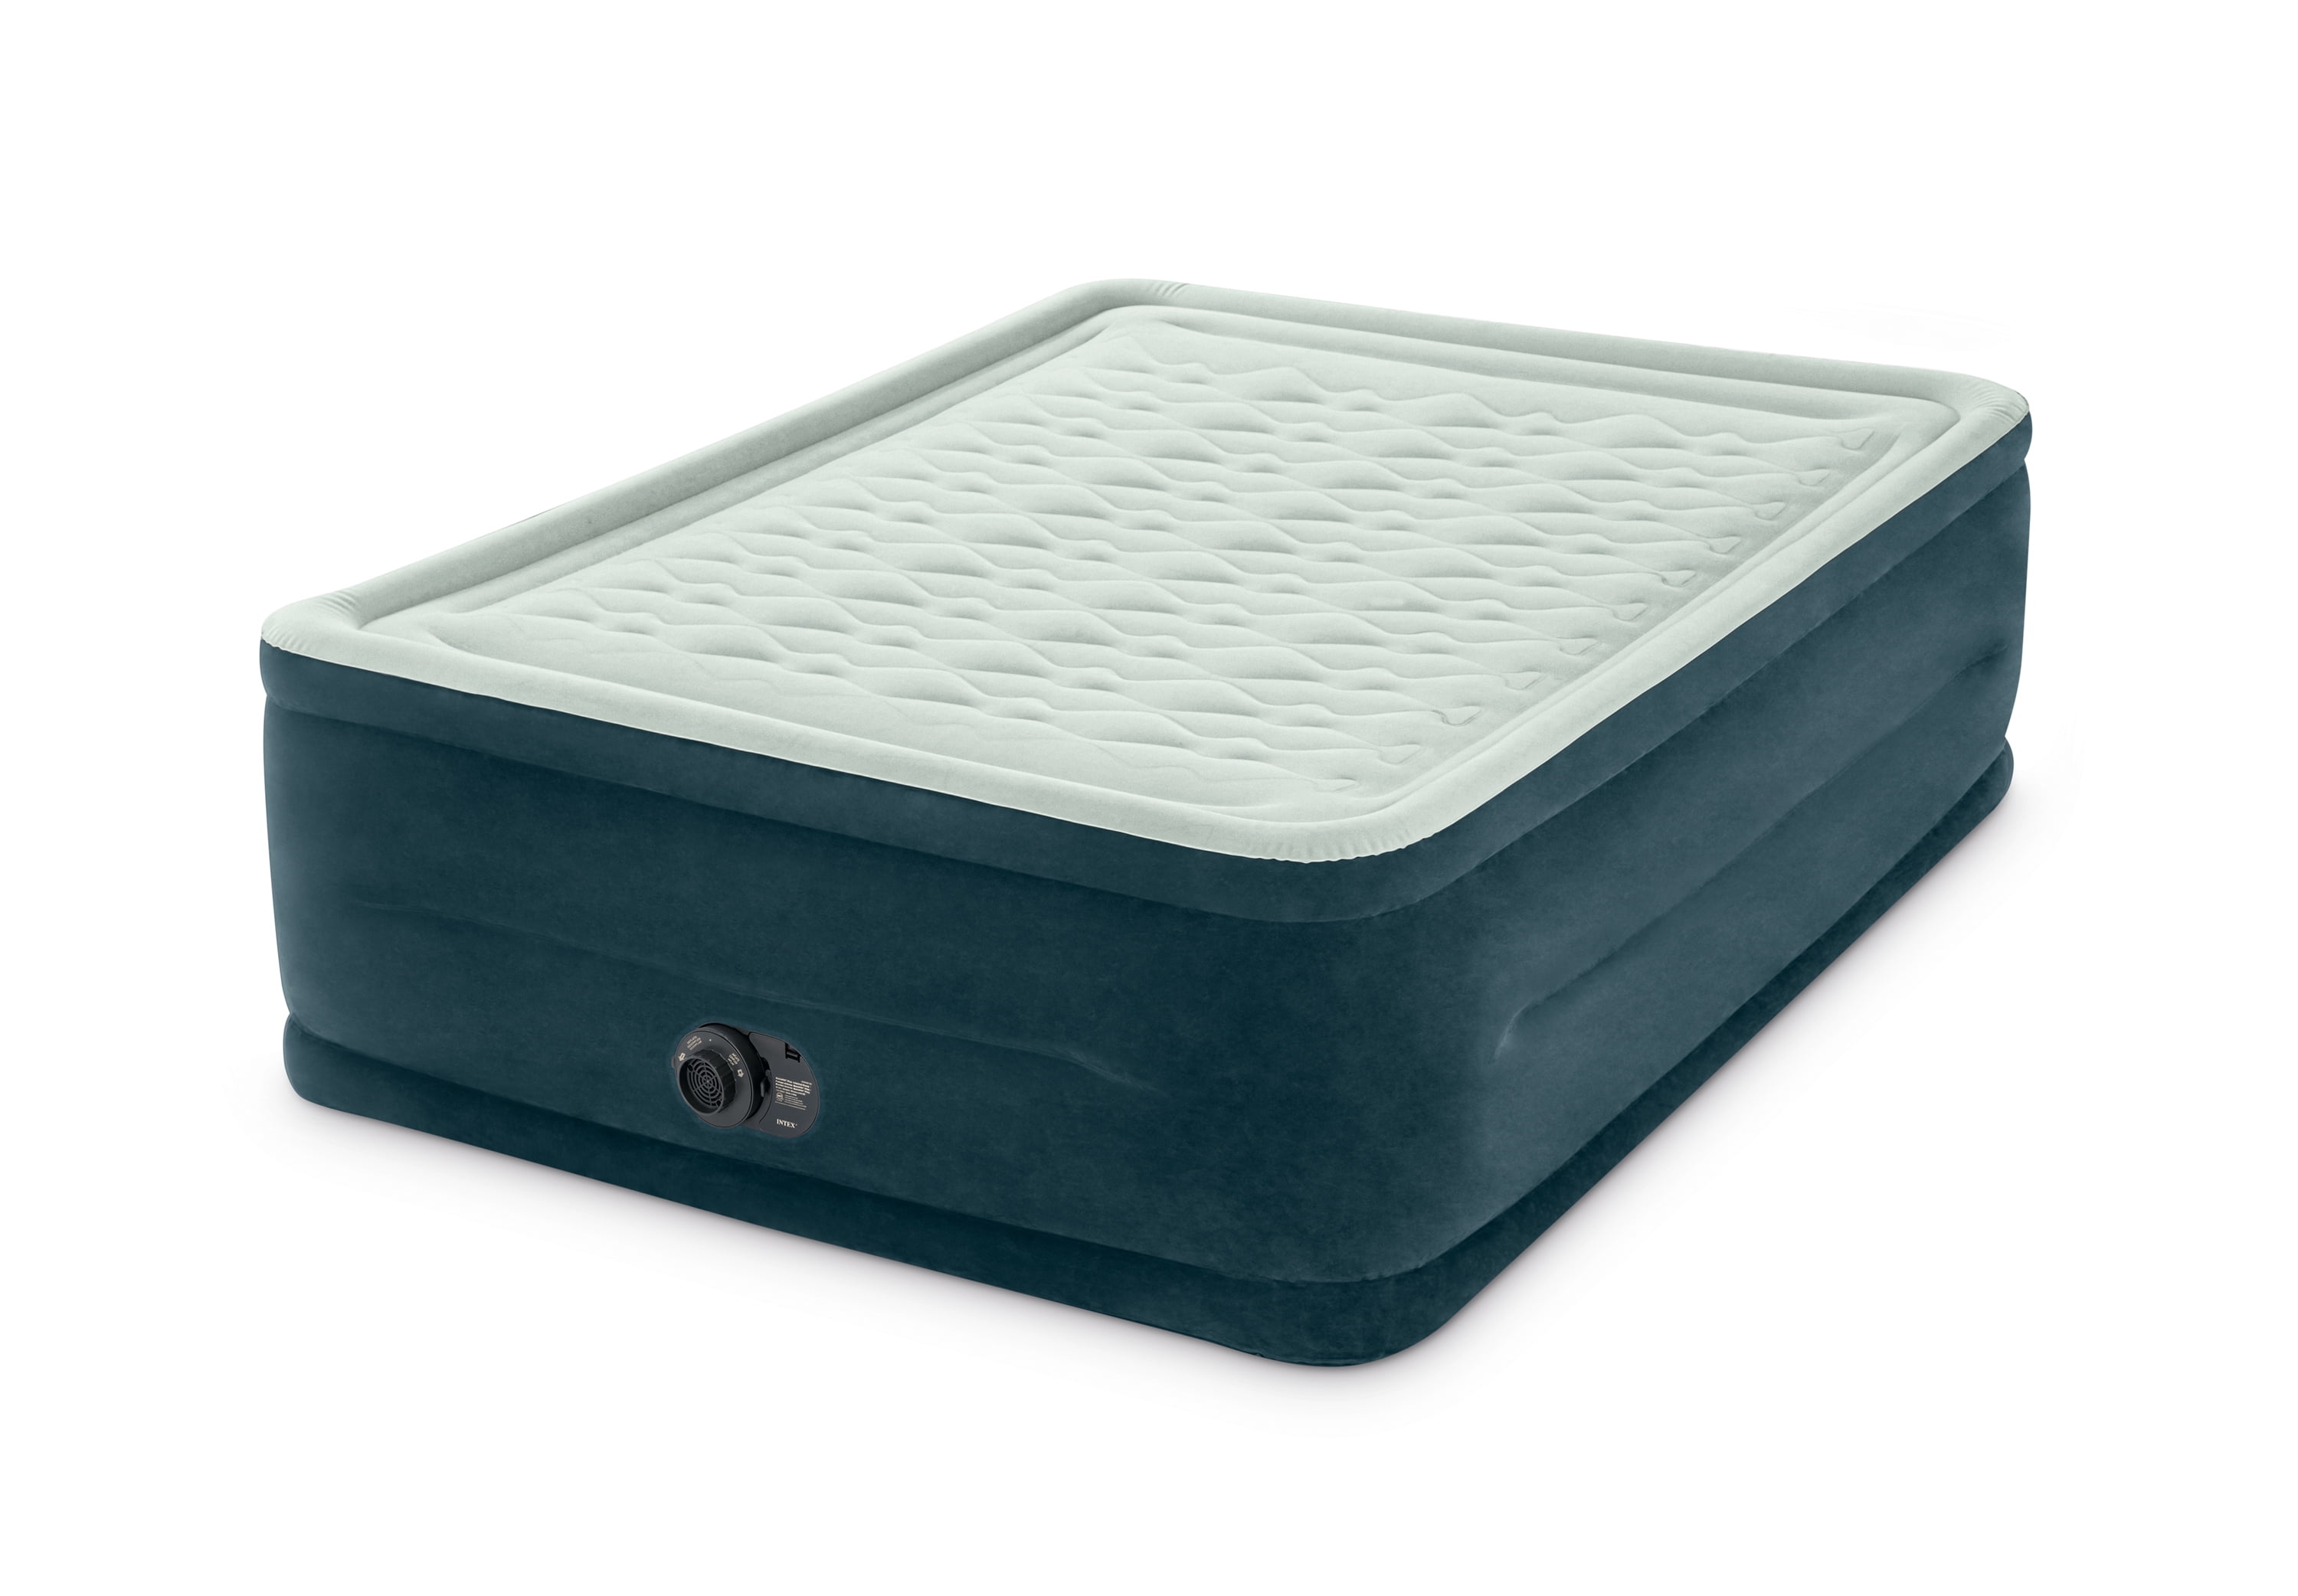 24" Intex Dream Lux Pillow Top  Dura-Beam Airbed Mattress w/ Built-In Pump and Carry Bag $69 + Free Shipping